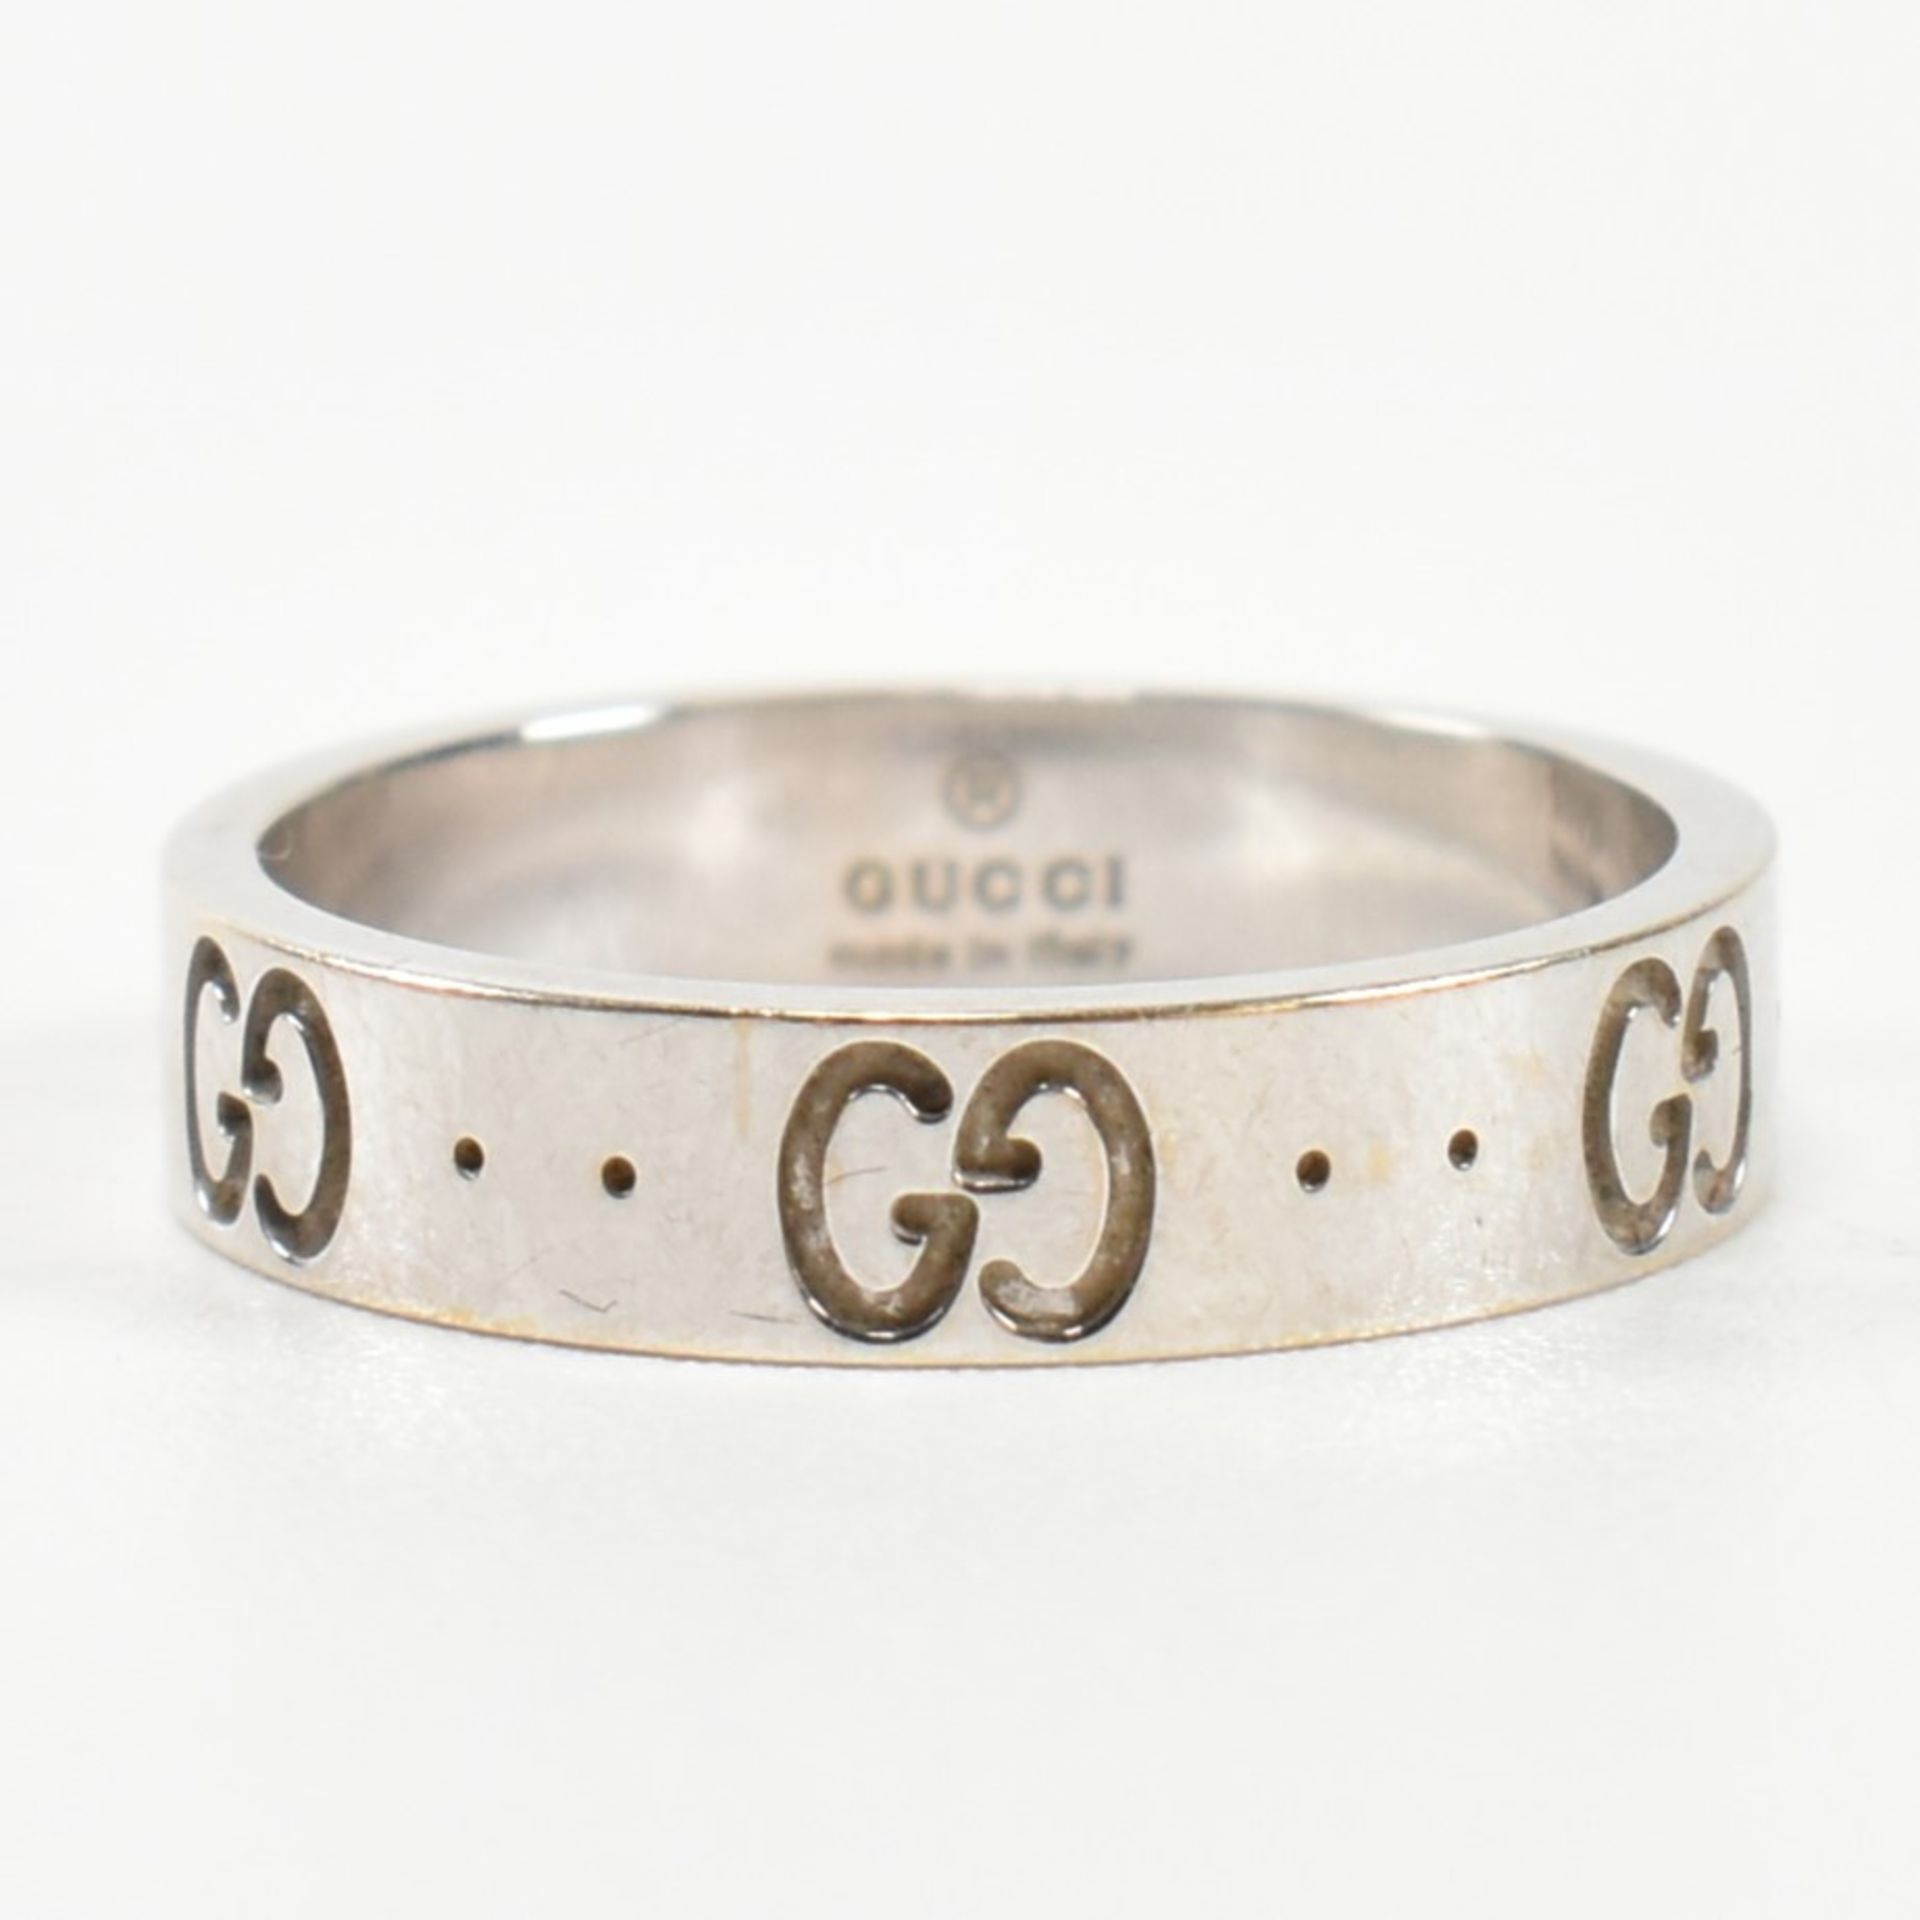 HALLMARKED 18CT WHITE GOLD GUCCI ICON BAND RING - Image 2 of 8